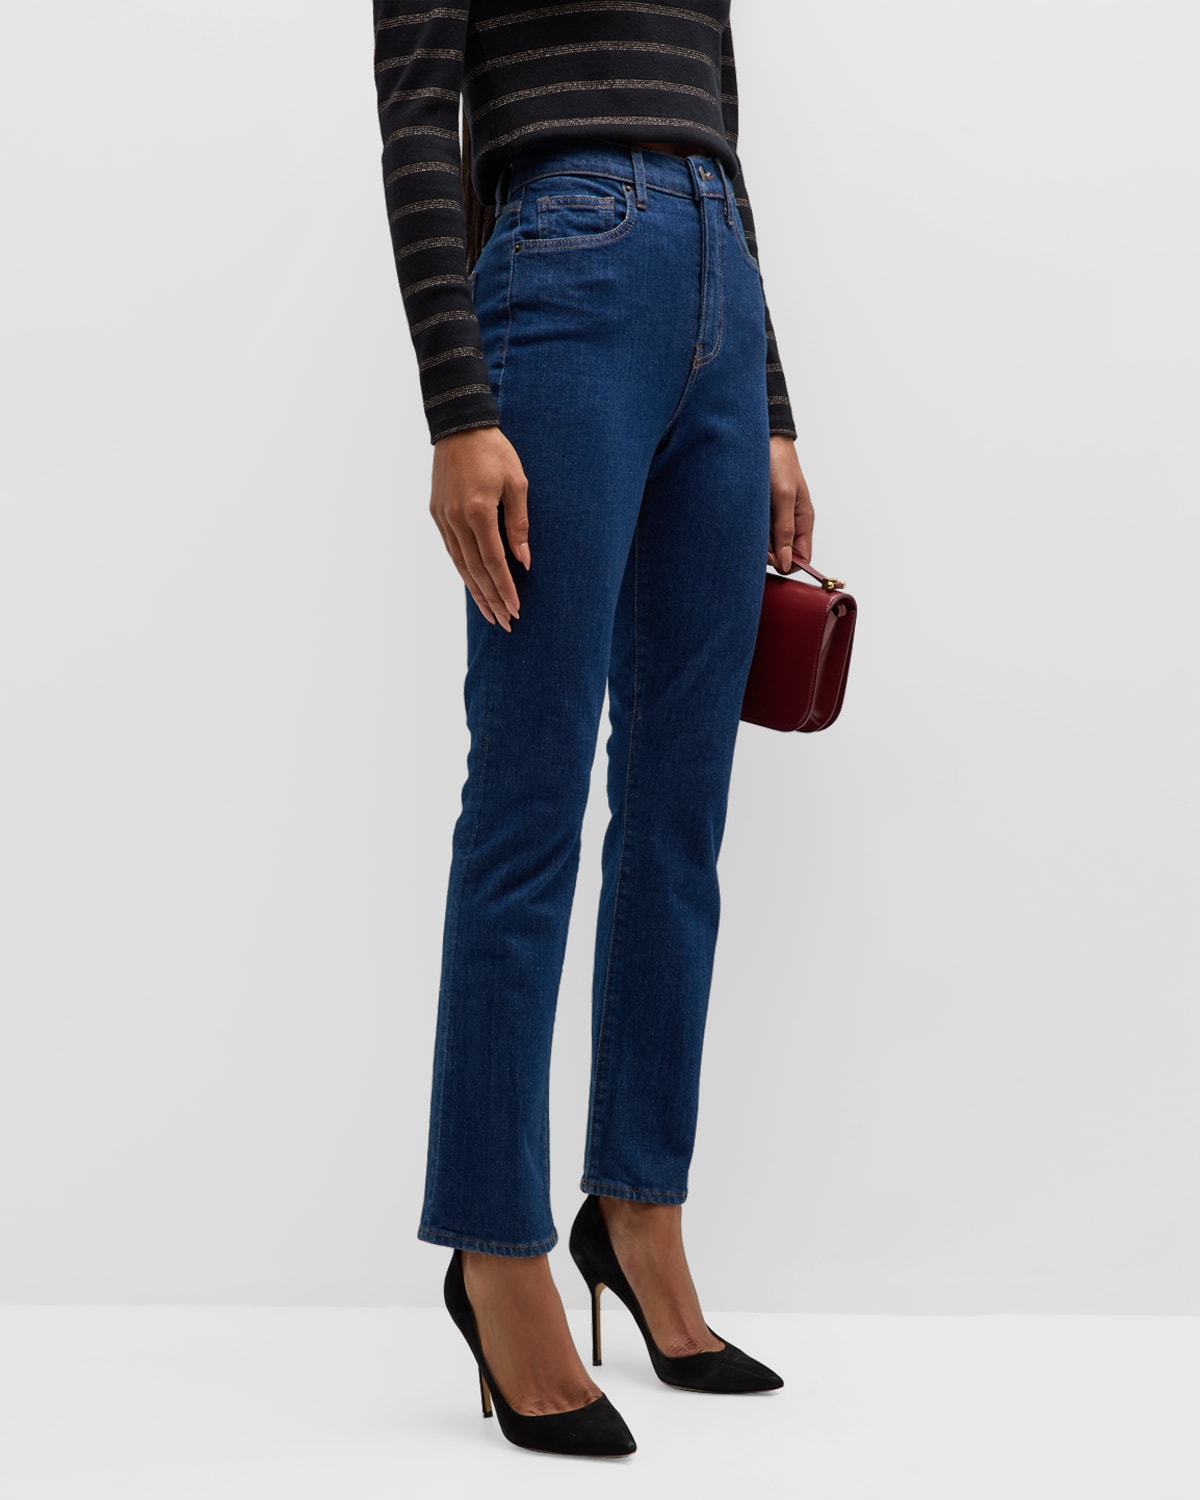 Veronica Beard Jeans Alenah Slim Straight Jeans In Rodeo Clea